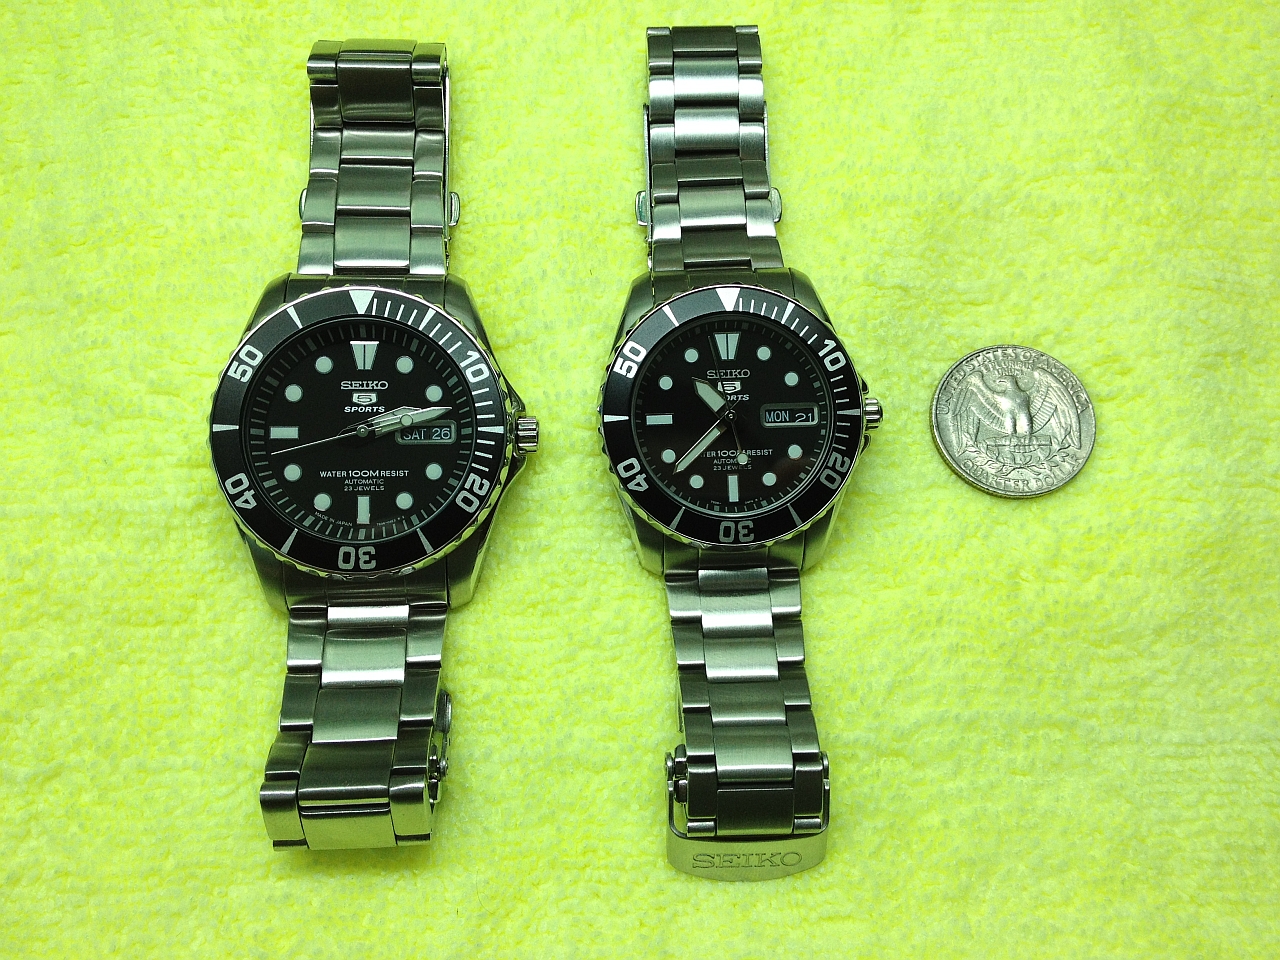 Påhængsmotor Squeak Ambient Seiko 5 black divers: SNZF17 & SNZF29 picture comparison/review |  WatchUSeek Watch Forums